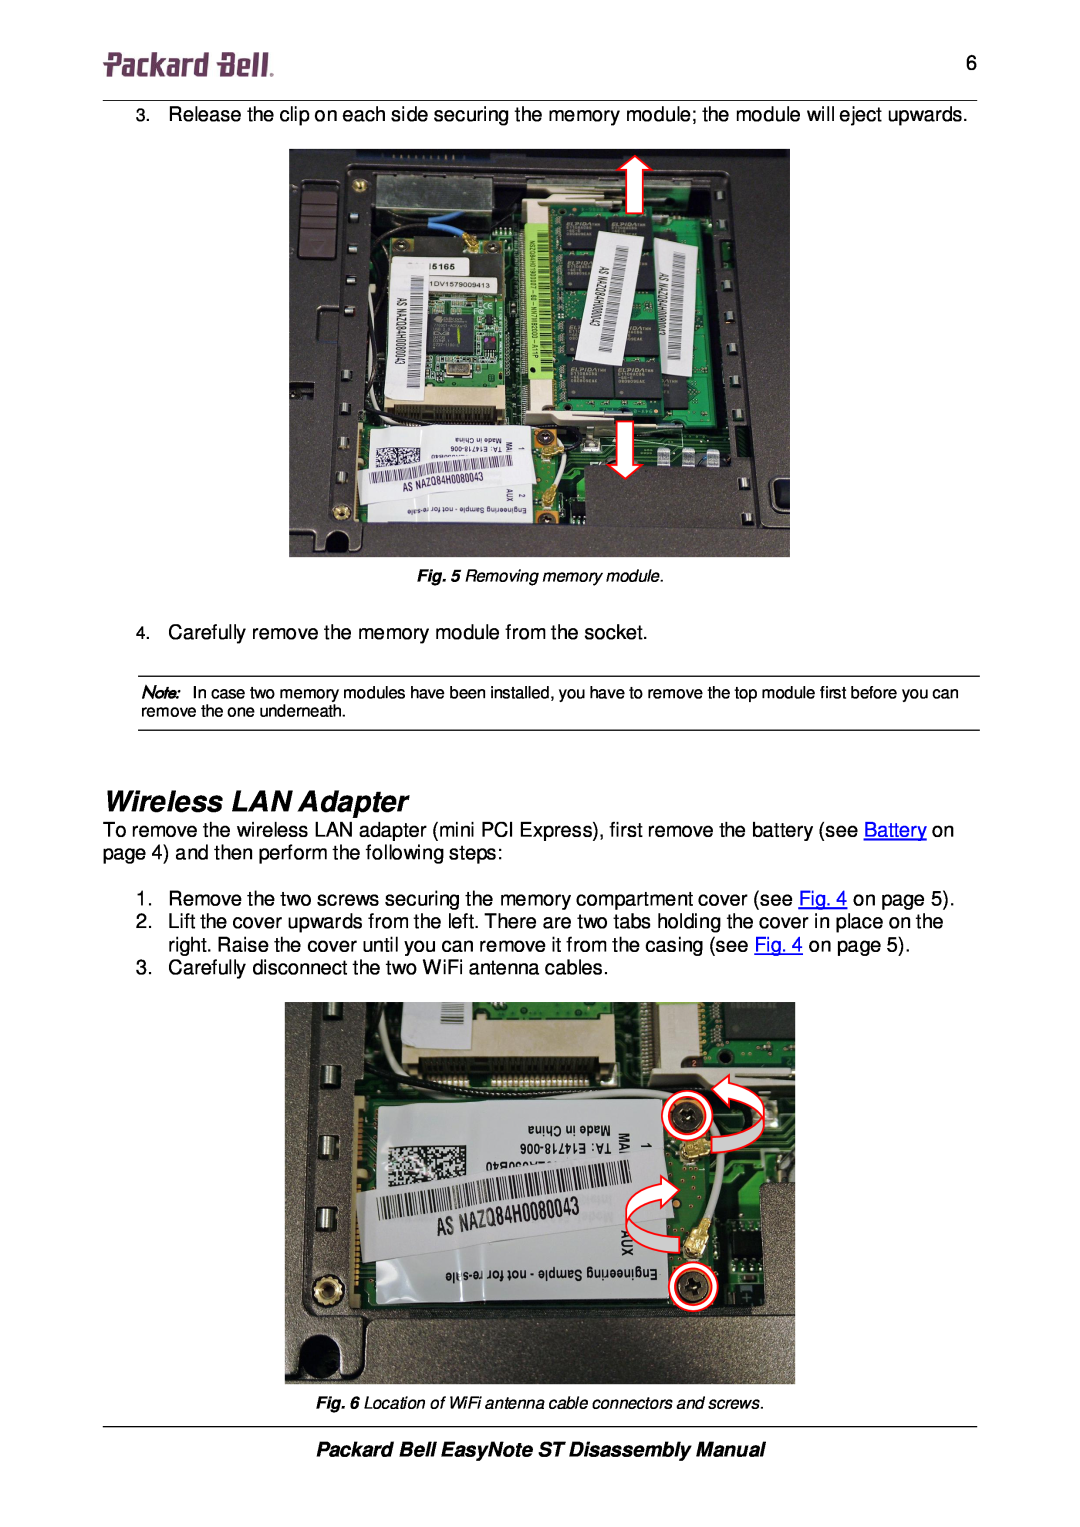 Packard Bell manual Wireless LAN Adapter, Packard Bell EasyNote ST Disassembly Manual, Removing memory module 